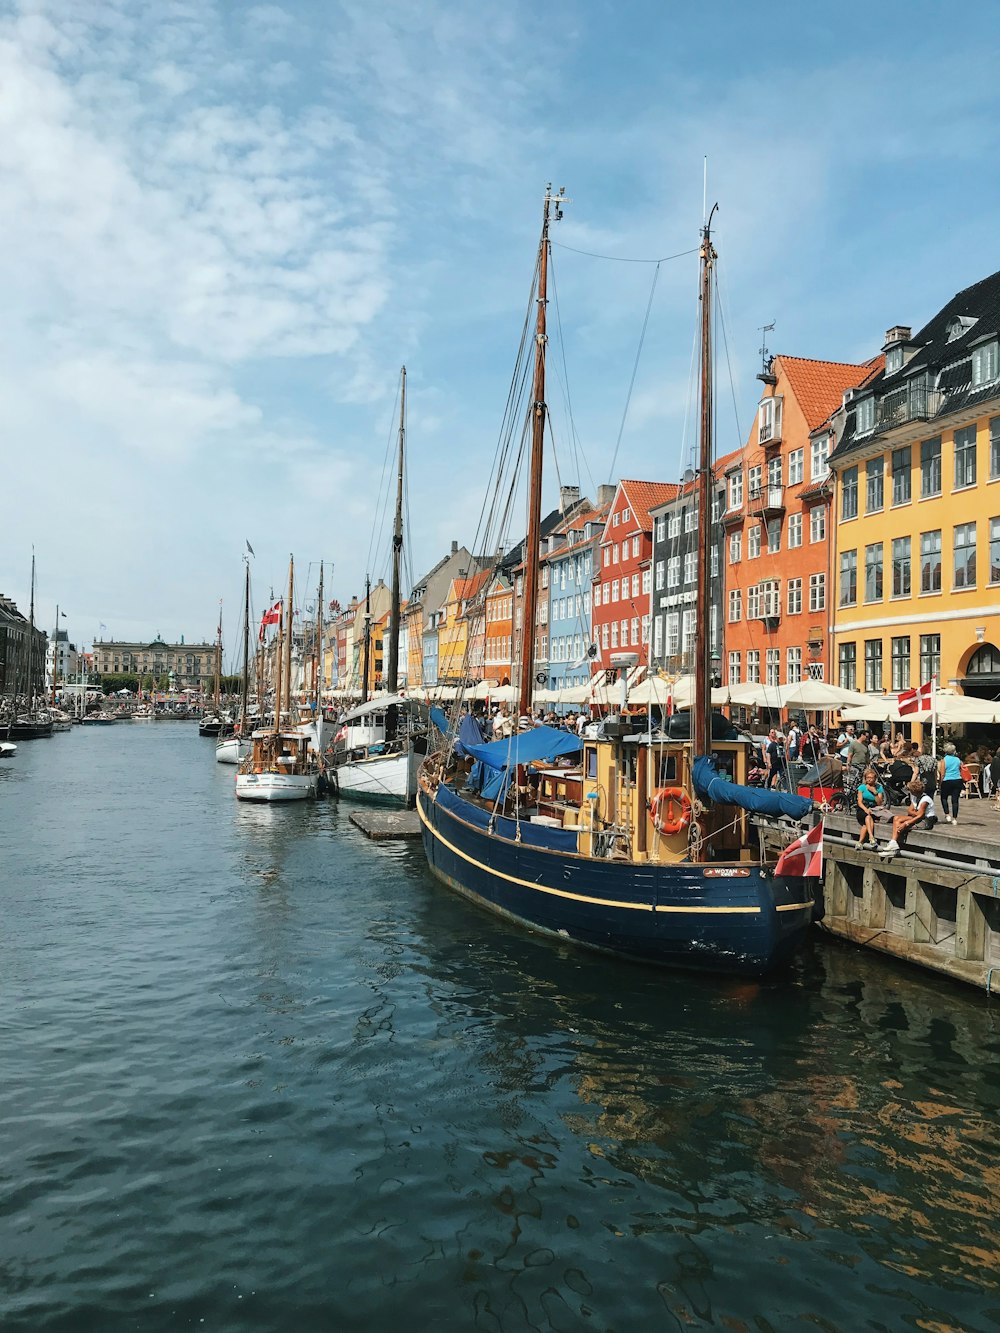 boats docked at the side of the building photo – Free Copenhagen Image on  Unsplash